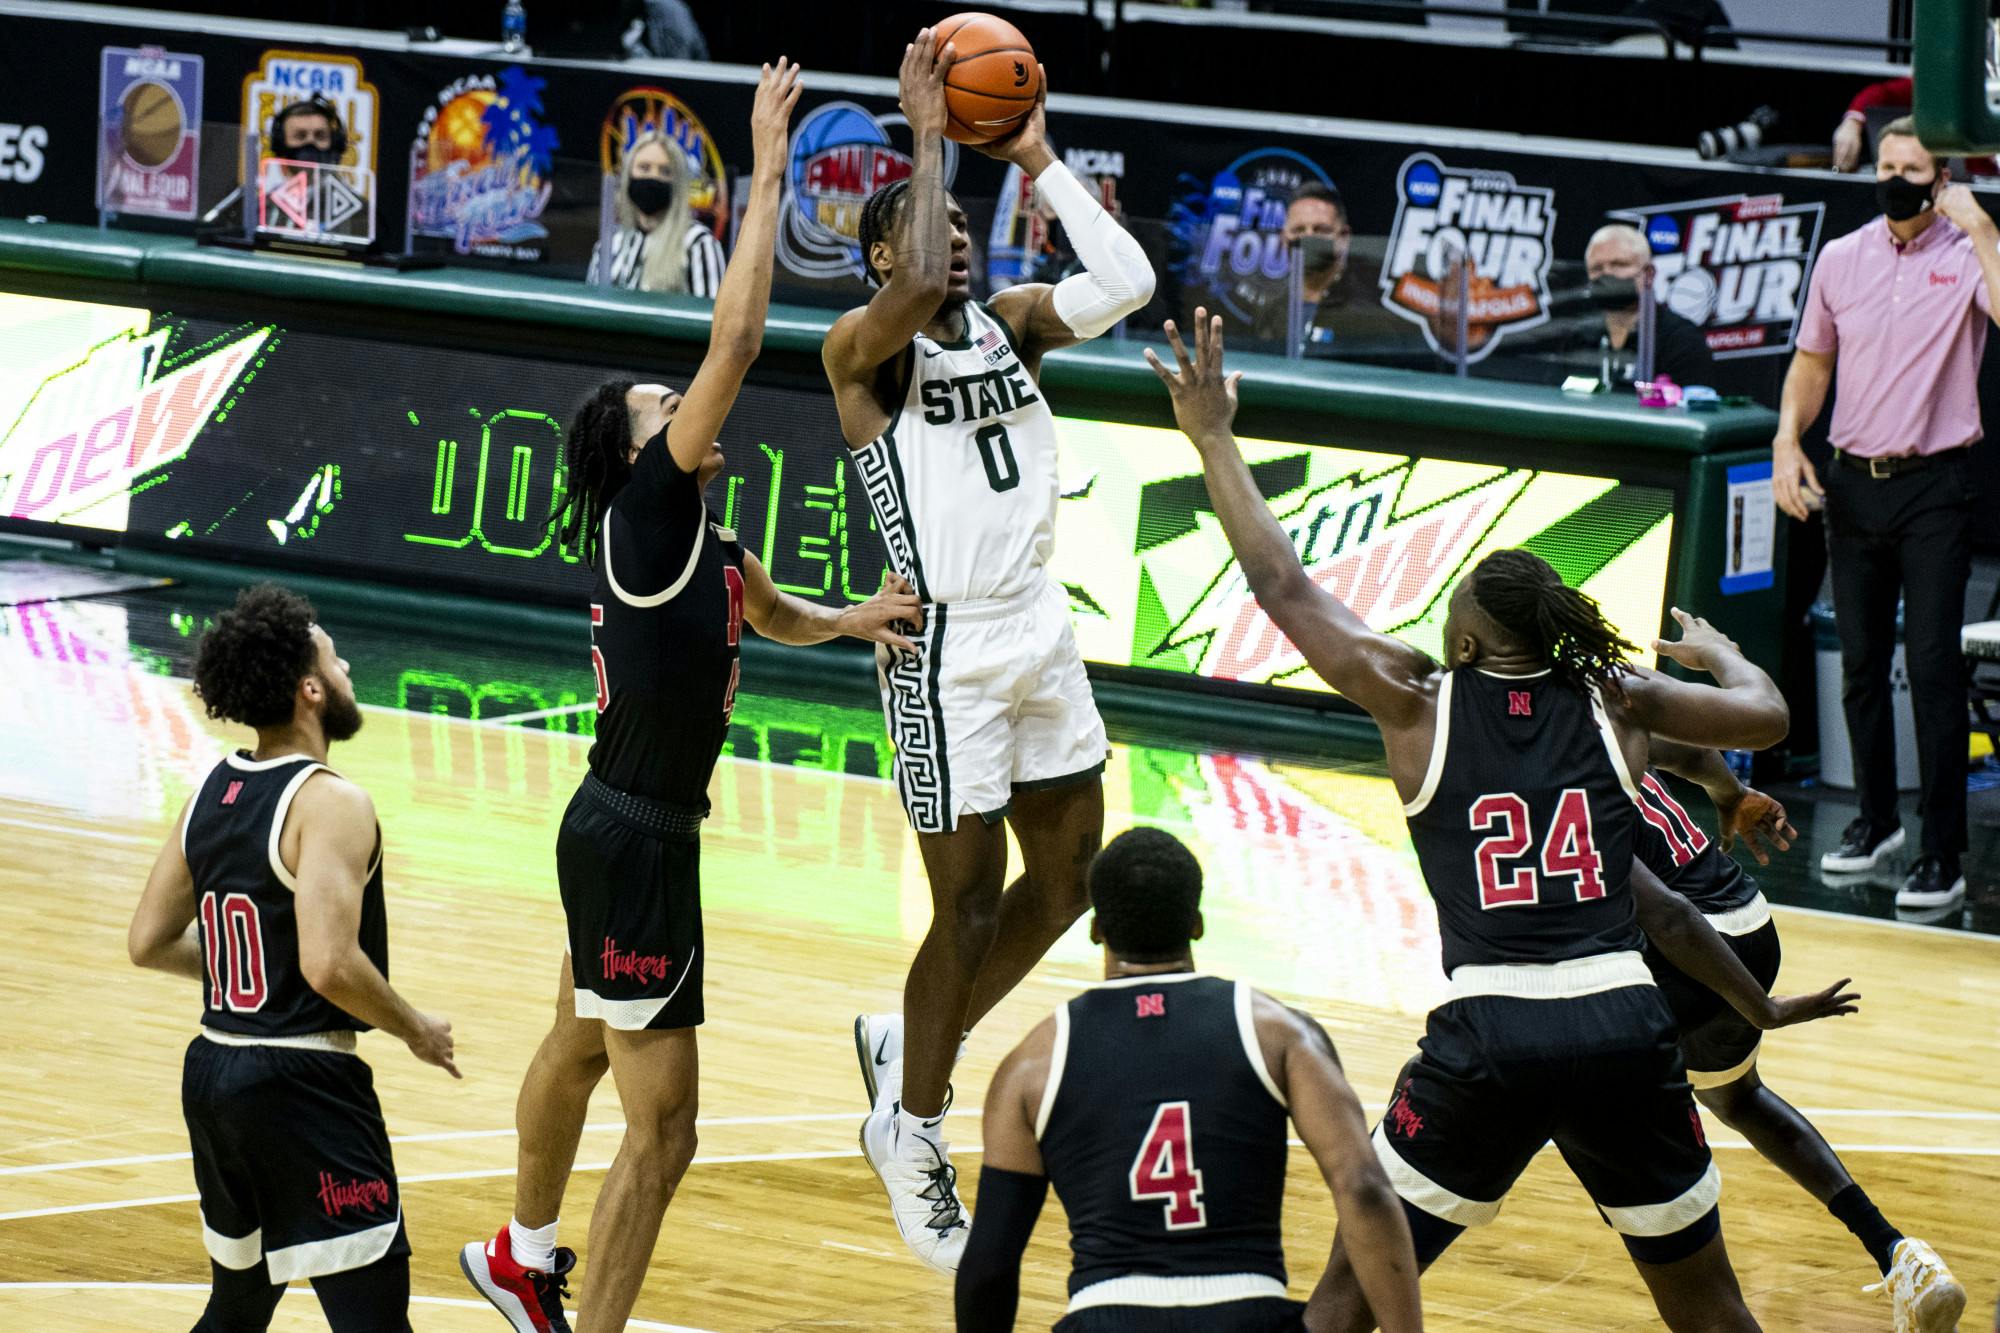 <p>Forward Aaron Henry (0) makes a shot during the game against Nebraska on Feb. 6, 2021, at the Breslin Center. The Spartans defeated the Cornhuskers, 66-56.</p>